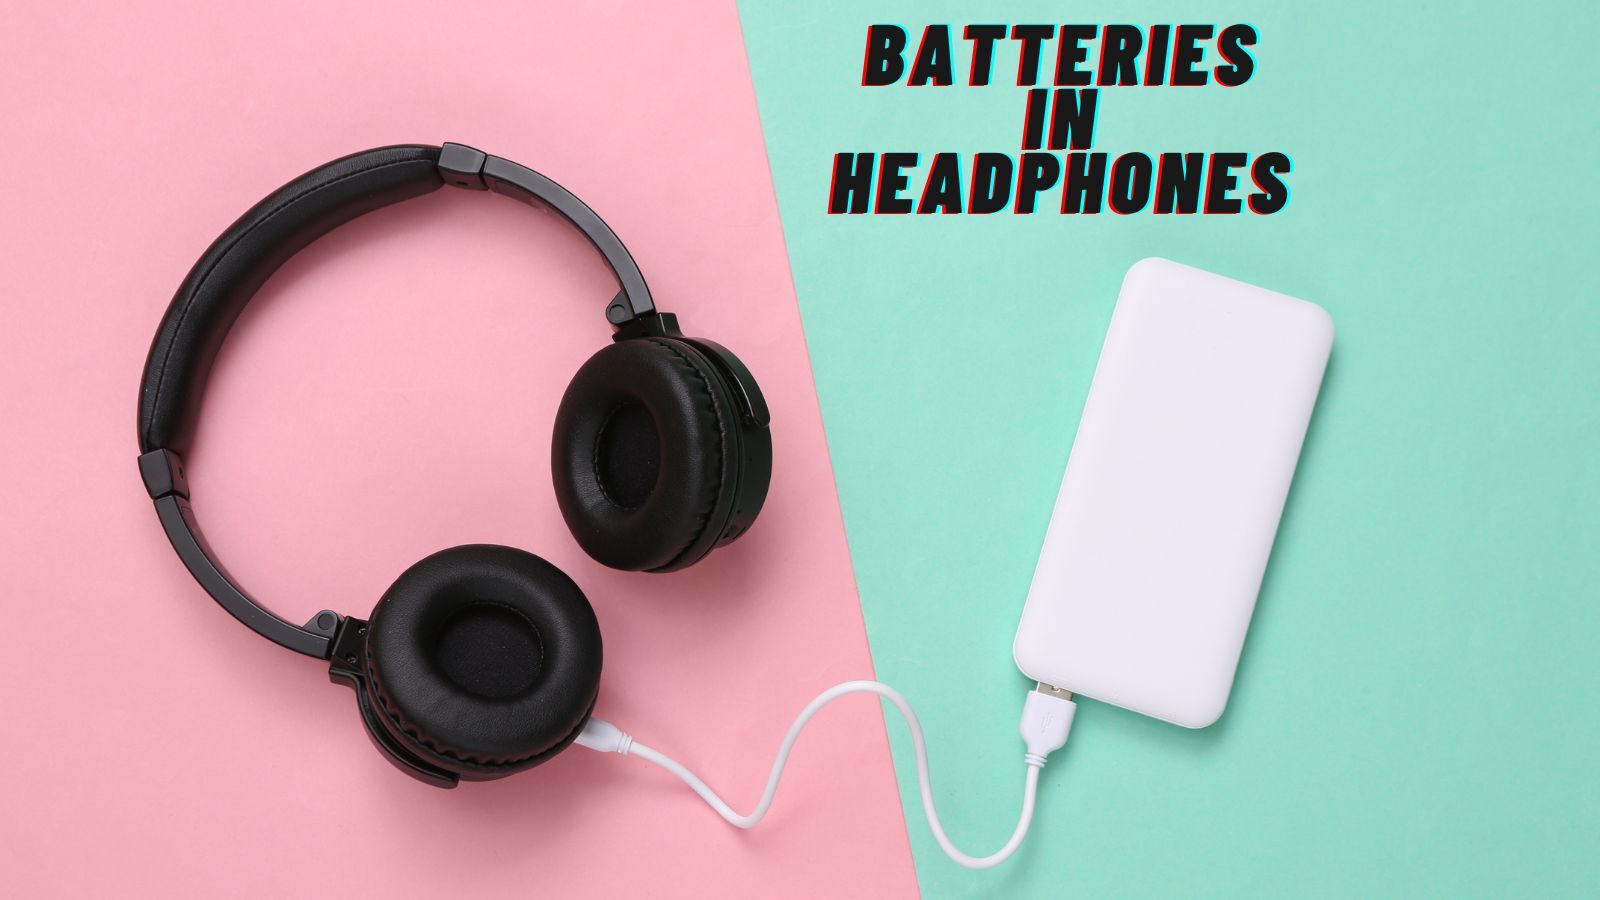 Headphone Battery: Why Go So Fast, And How to Extend the Life?